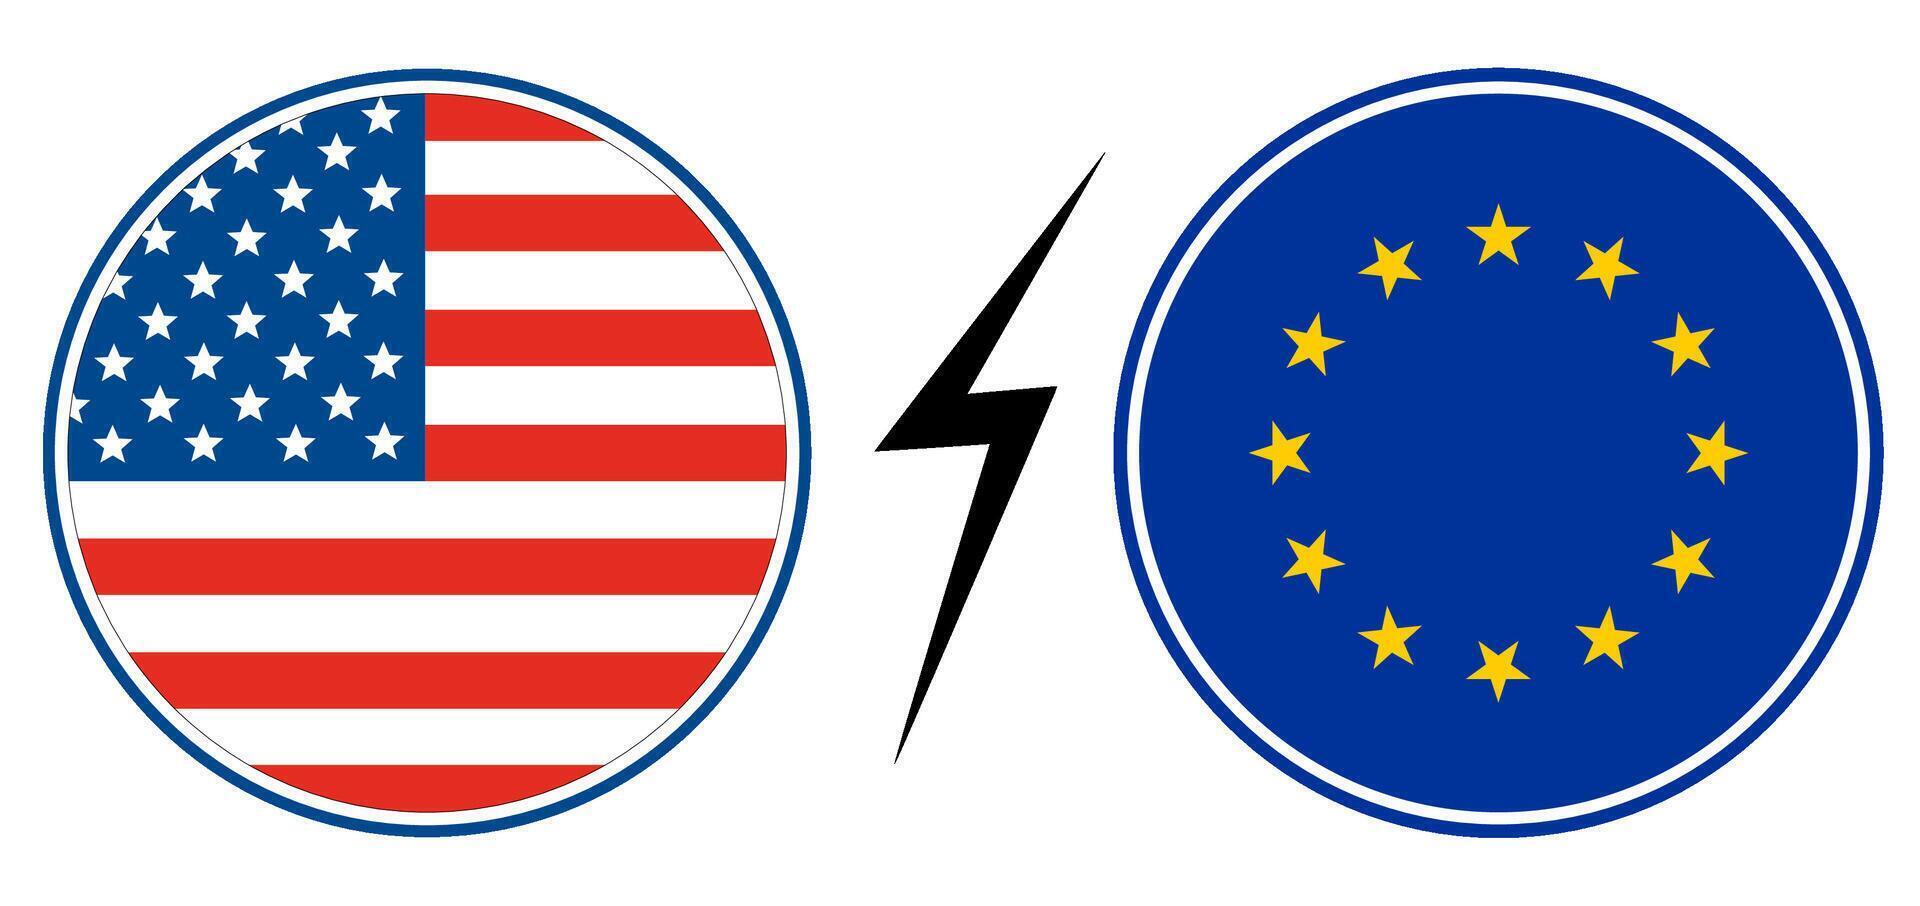 USA vs EU. Flag of United States of America and the European Union in circle shape vector